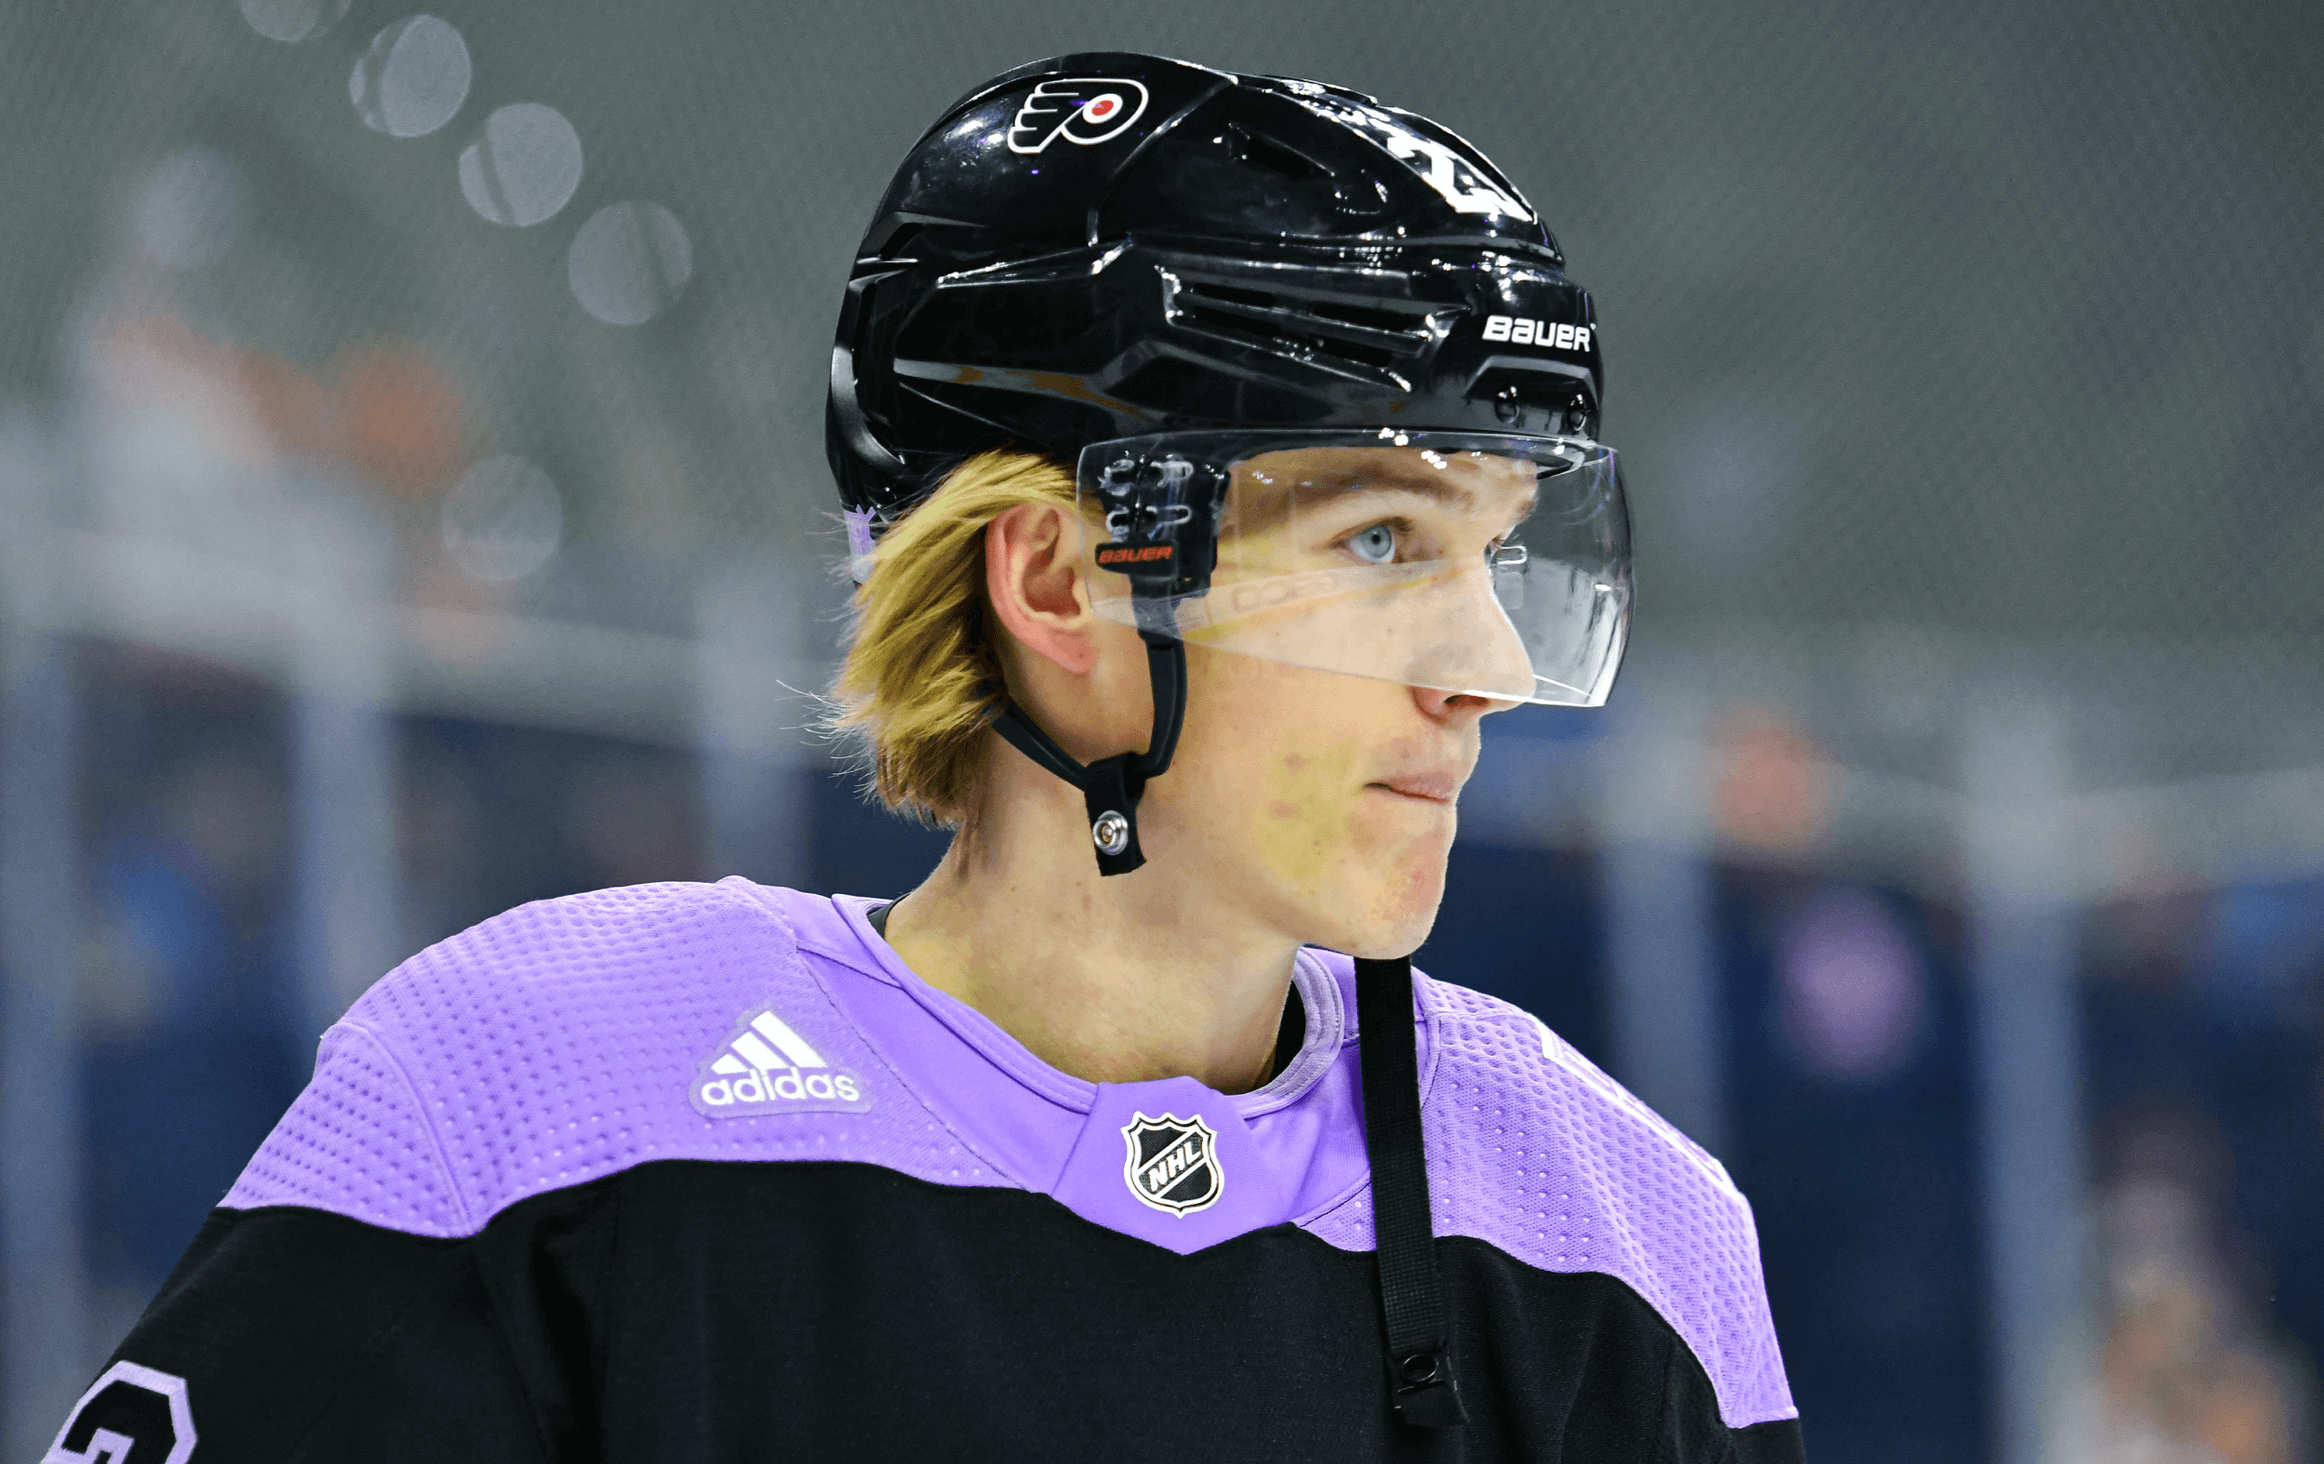 Oskar Lindblom is helping push the Flyers' second line to new heights